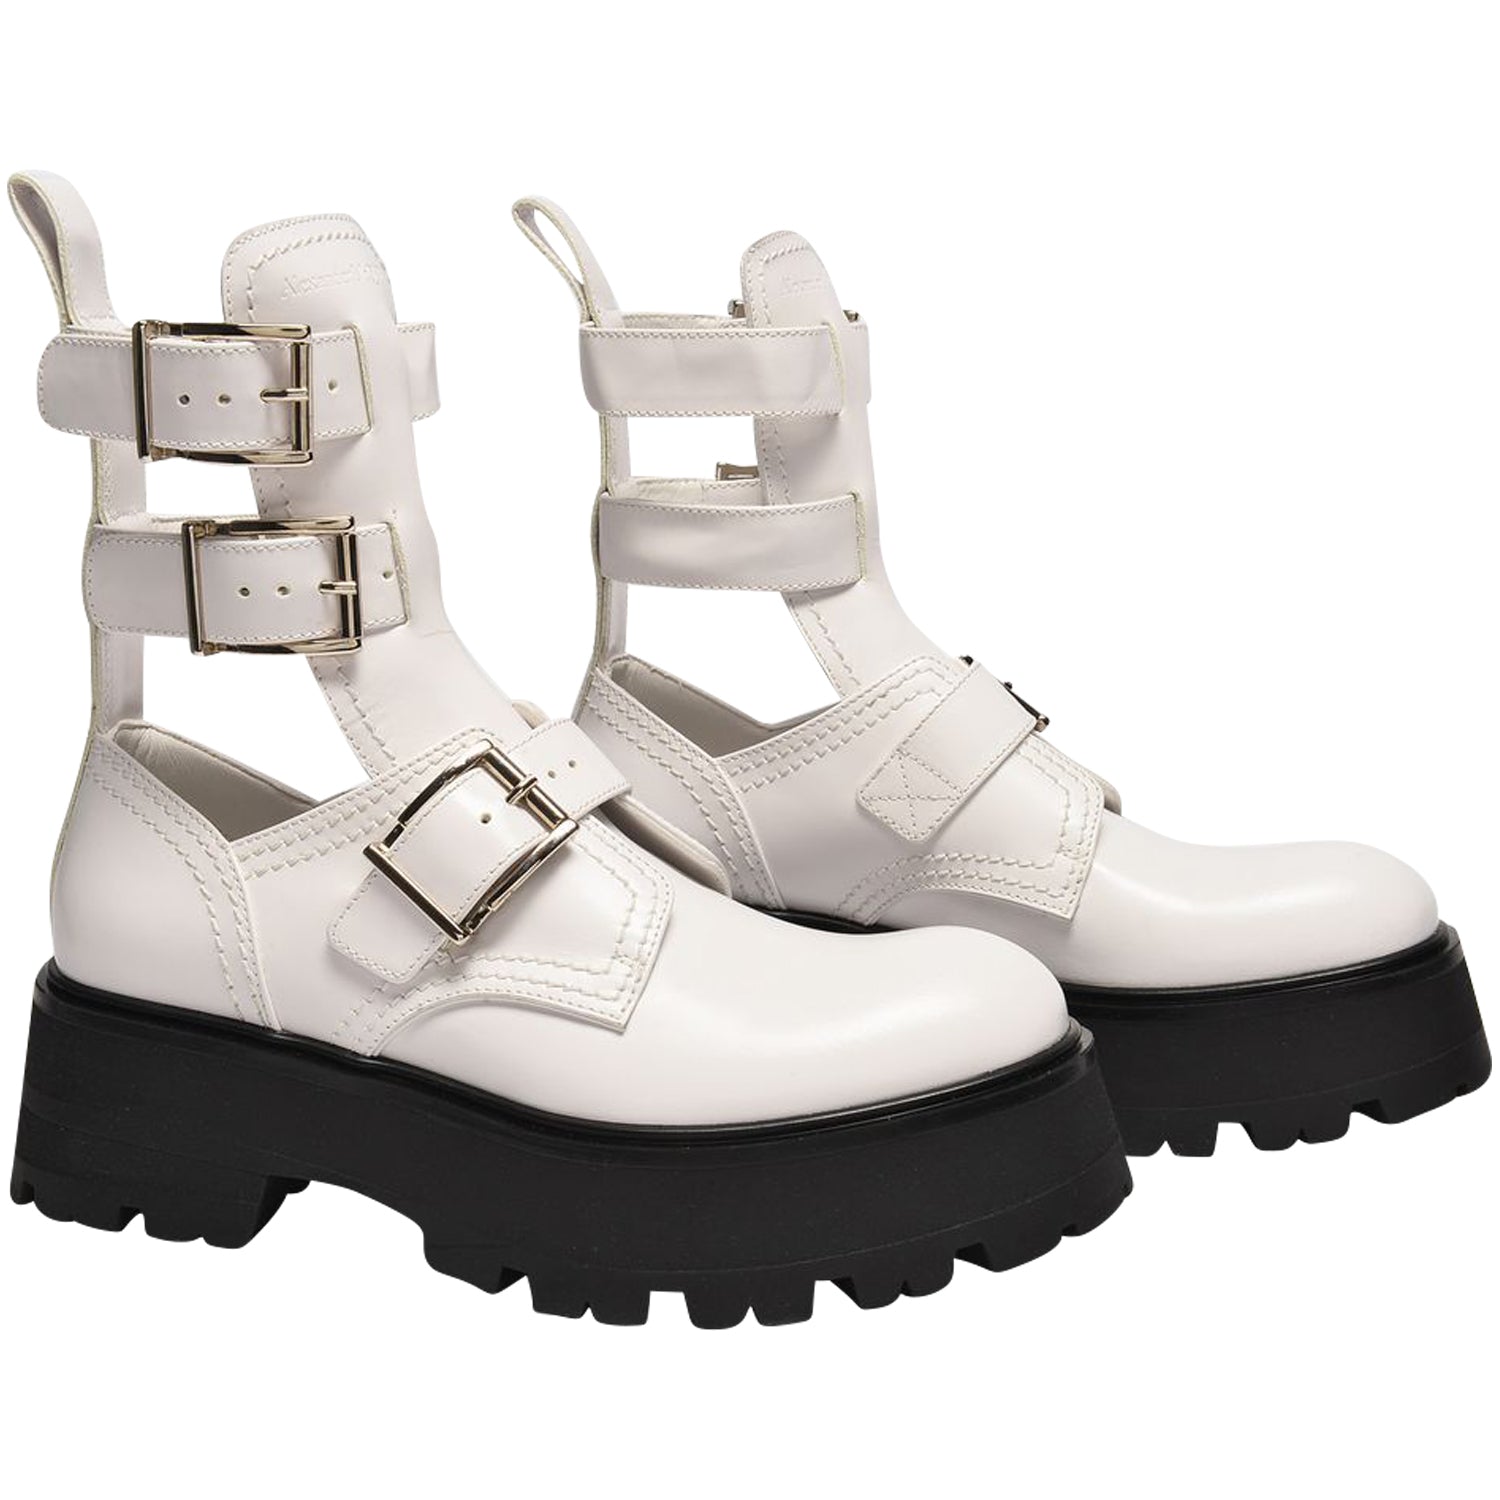 ALEXANDER MCQUEEN Platform Shoes in White Leather